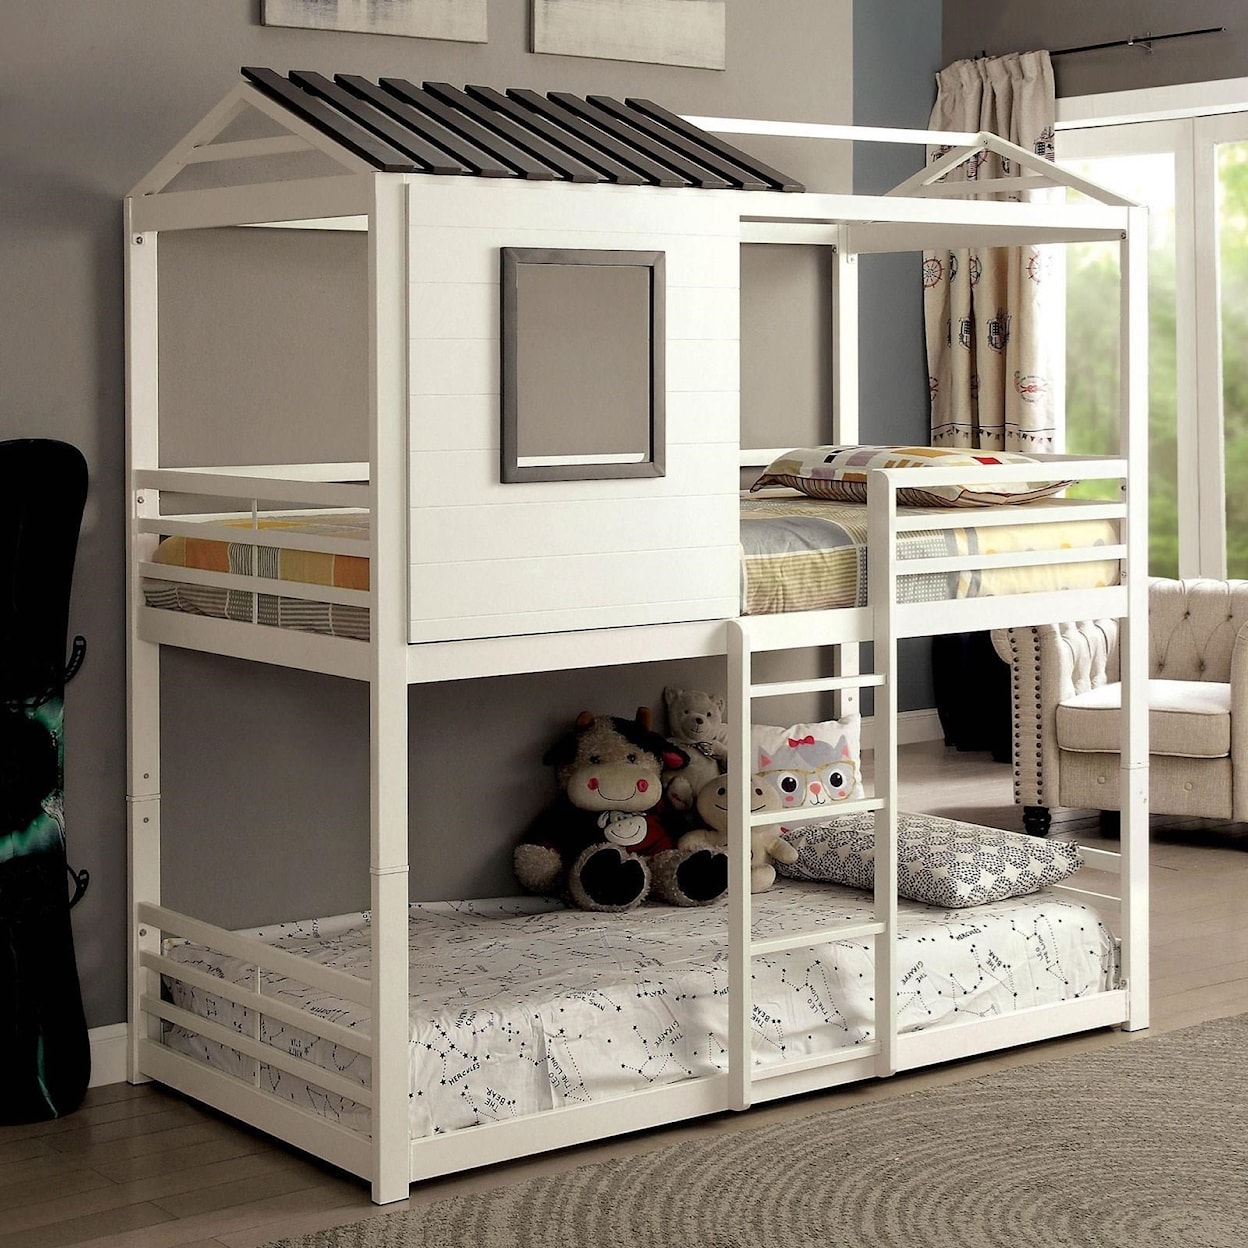 Furniture of America Stockholm Twin-over-Twin Bunk Bed